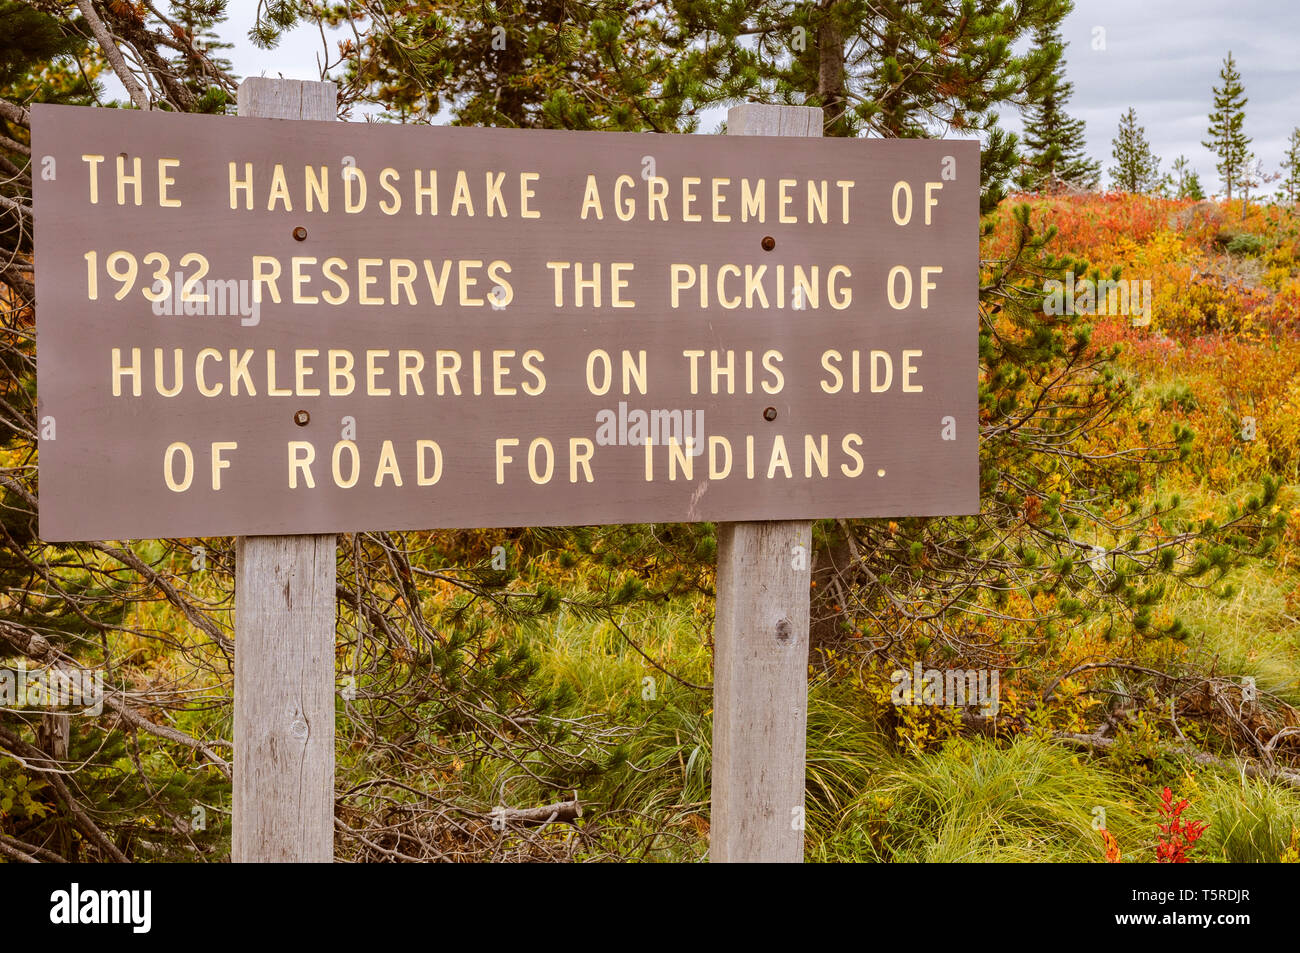 Native American treaty rights sign at Sawtooth Berry Fields, Gifford Pinchot National Forest, Washington. Stock Photo